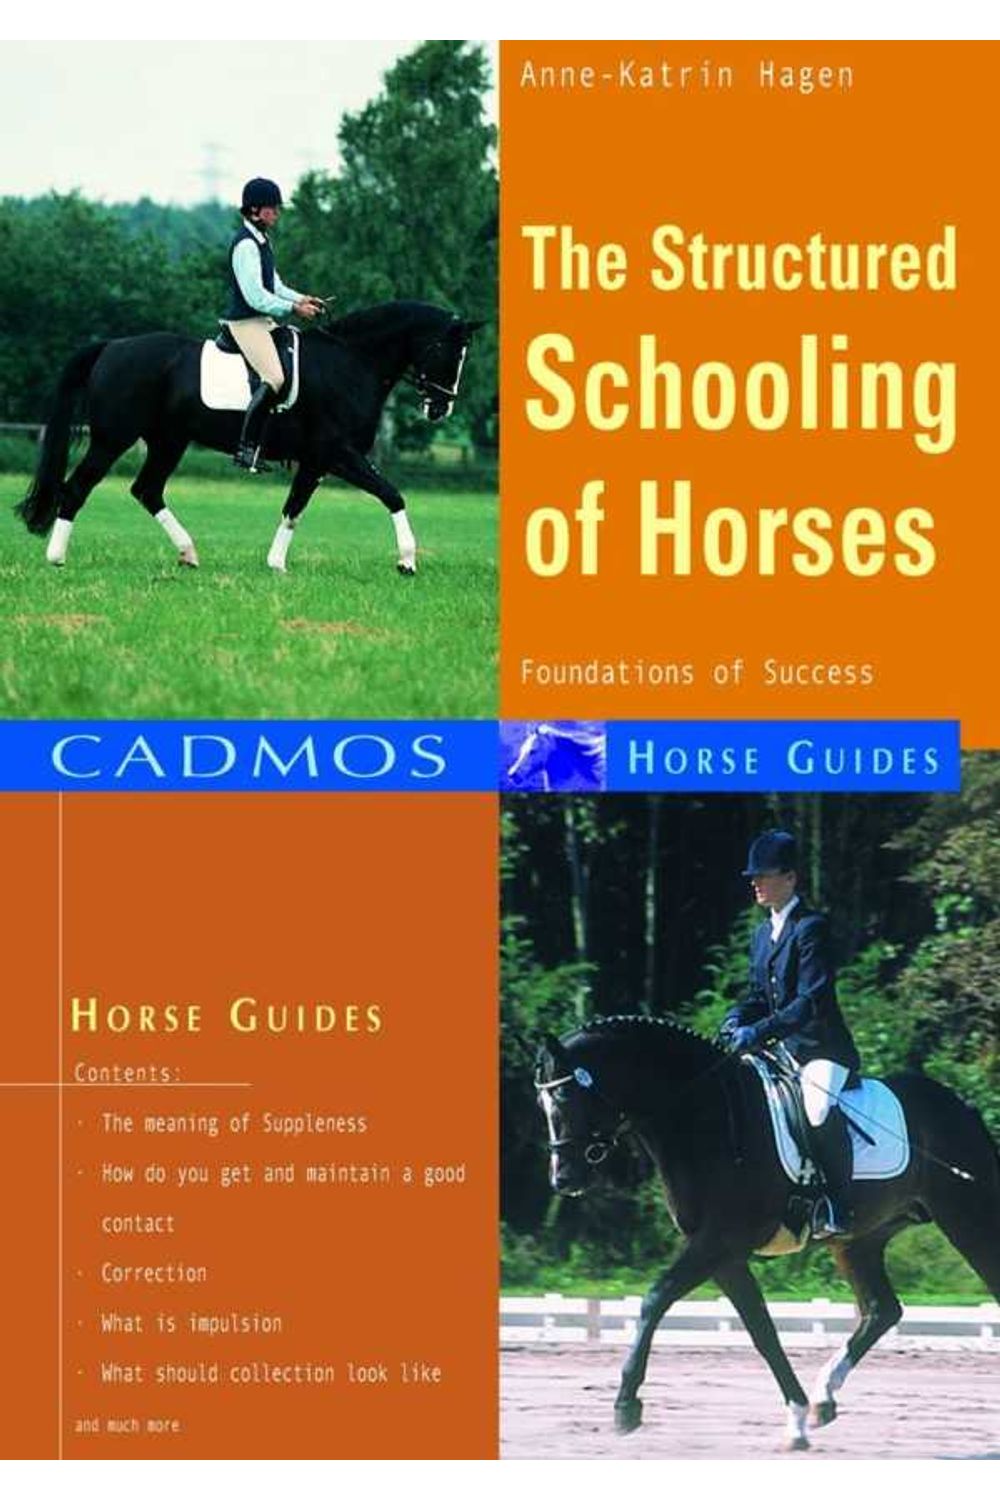 bw-the-structured-schooling-of-horses-cadmos-publishing-9780857887122